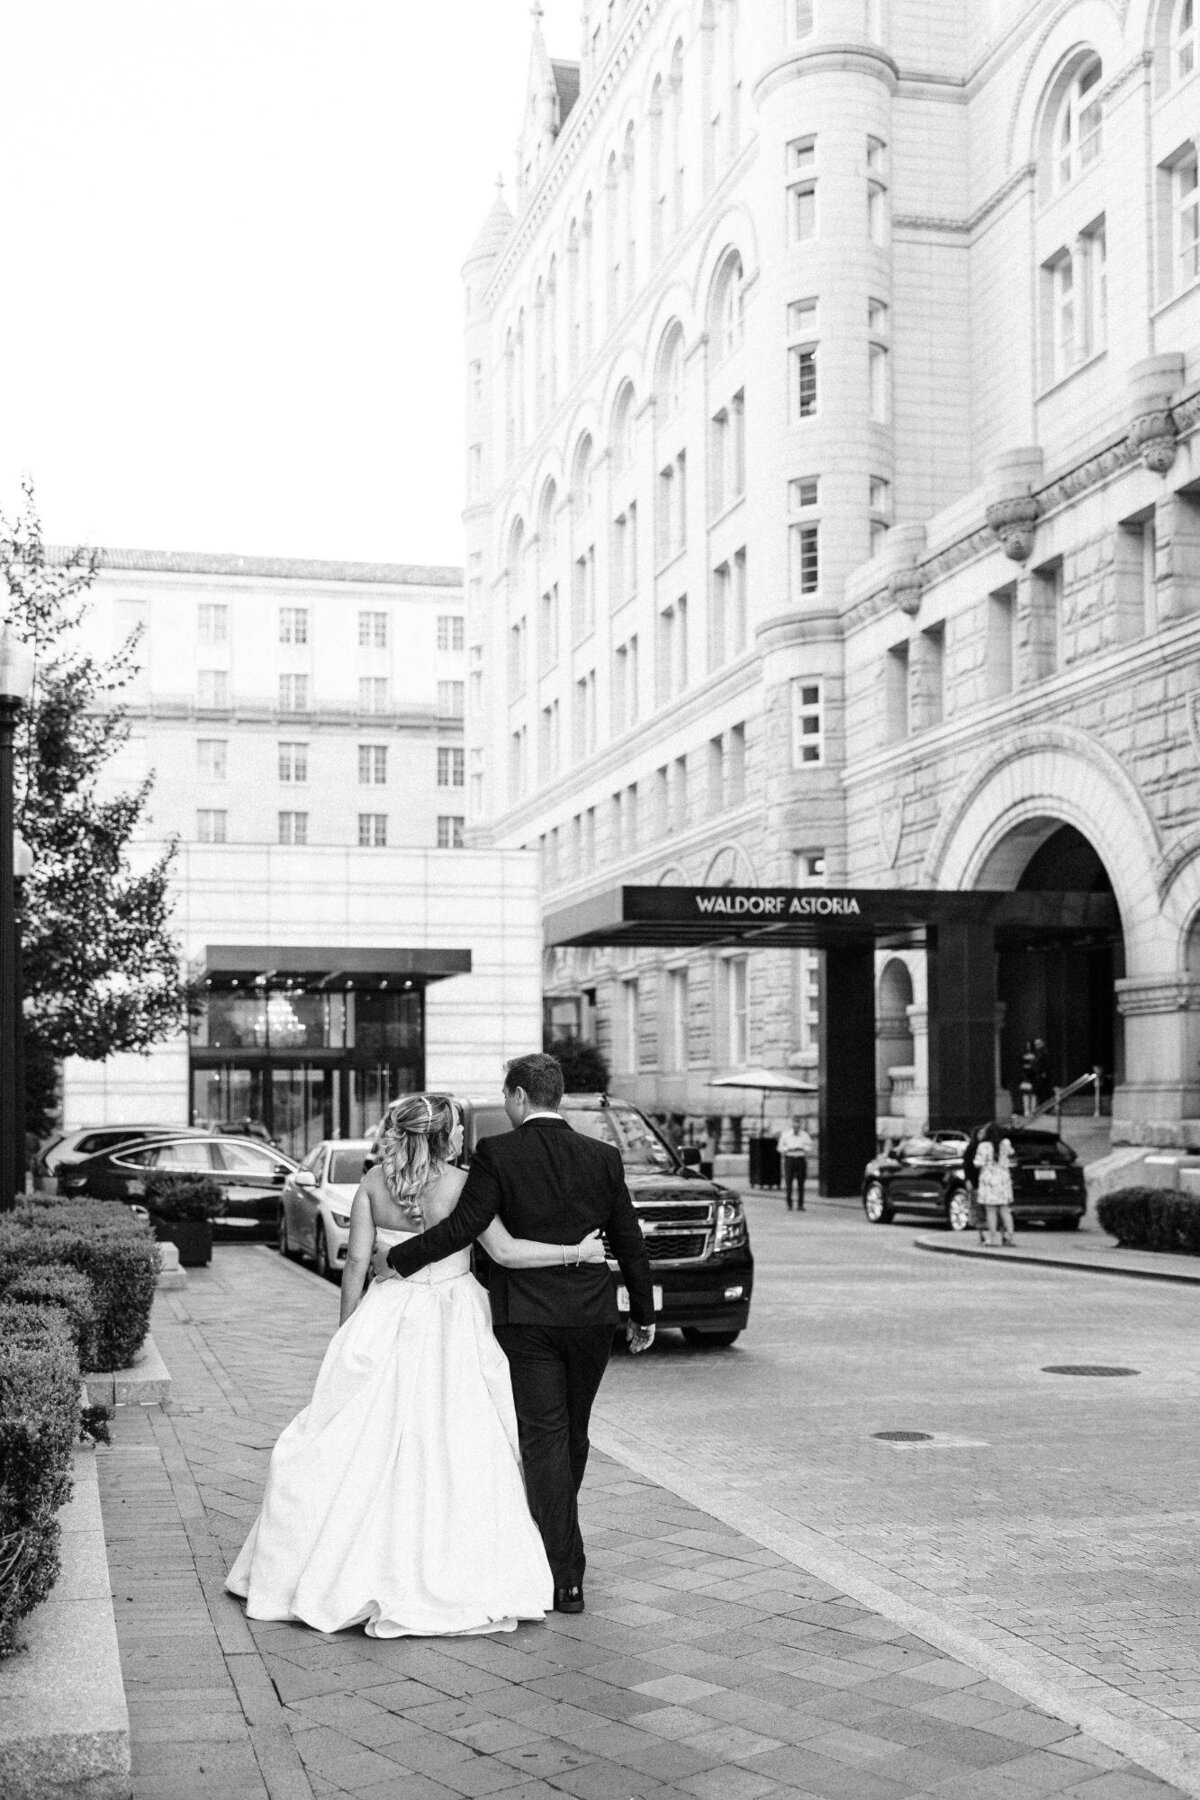 A bride and groom walking hand in hand outside the waldorf astoria hotel.